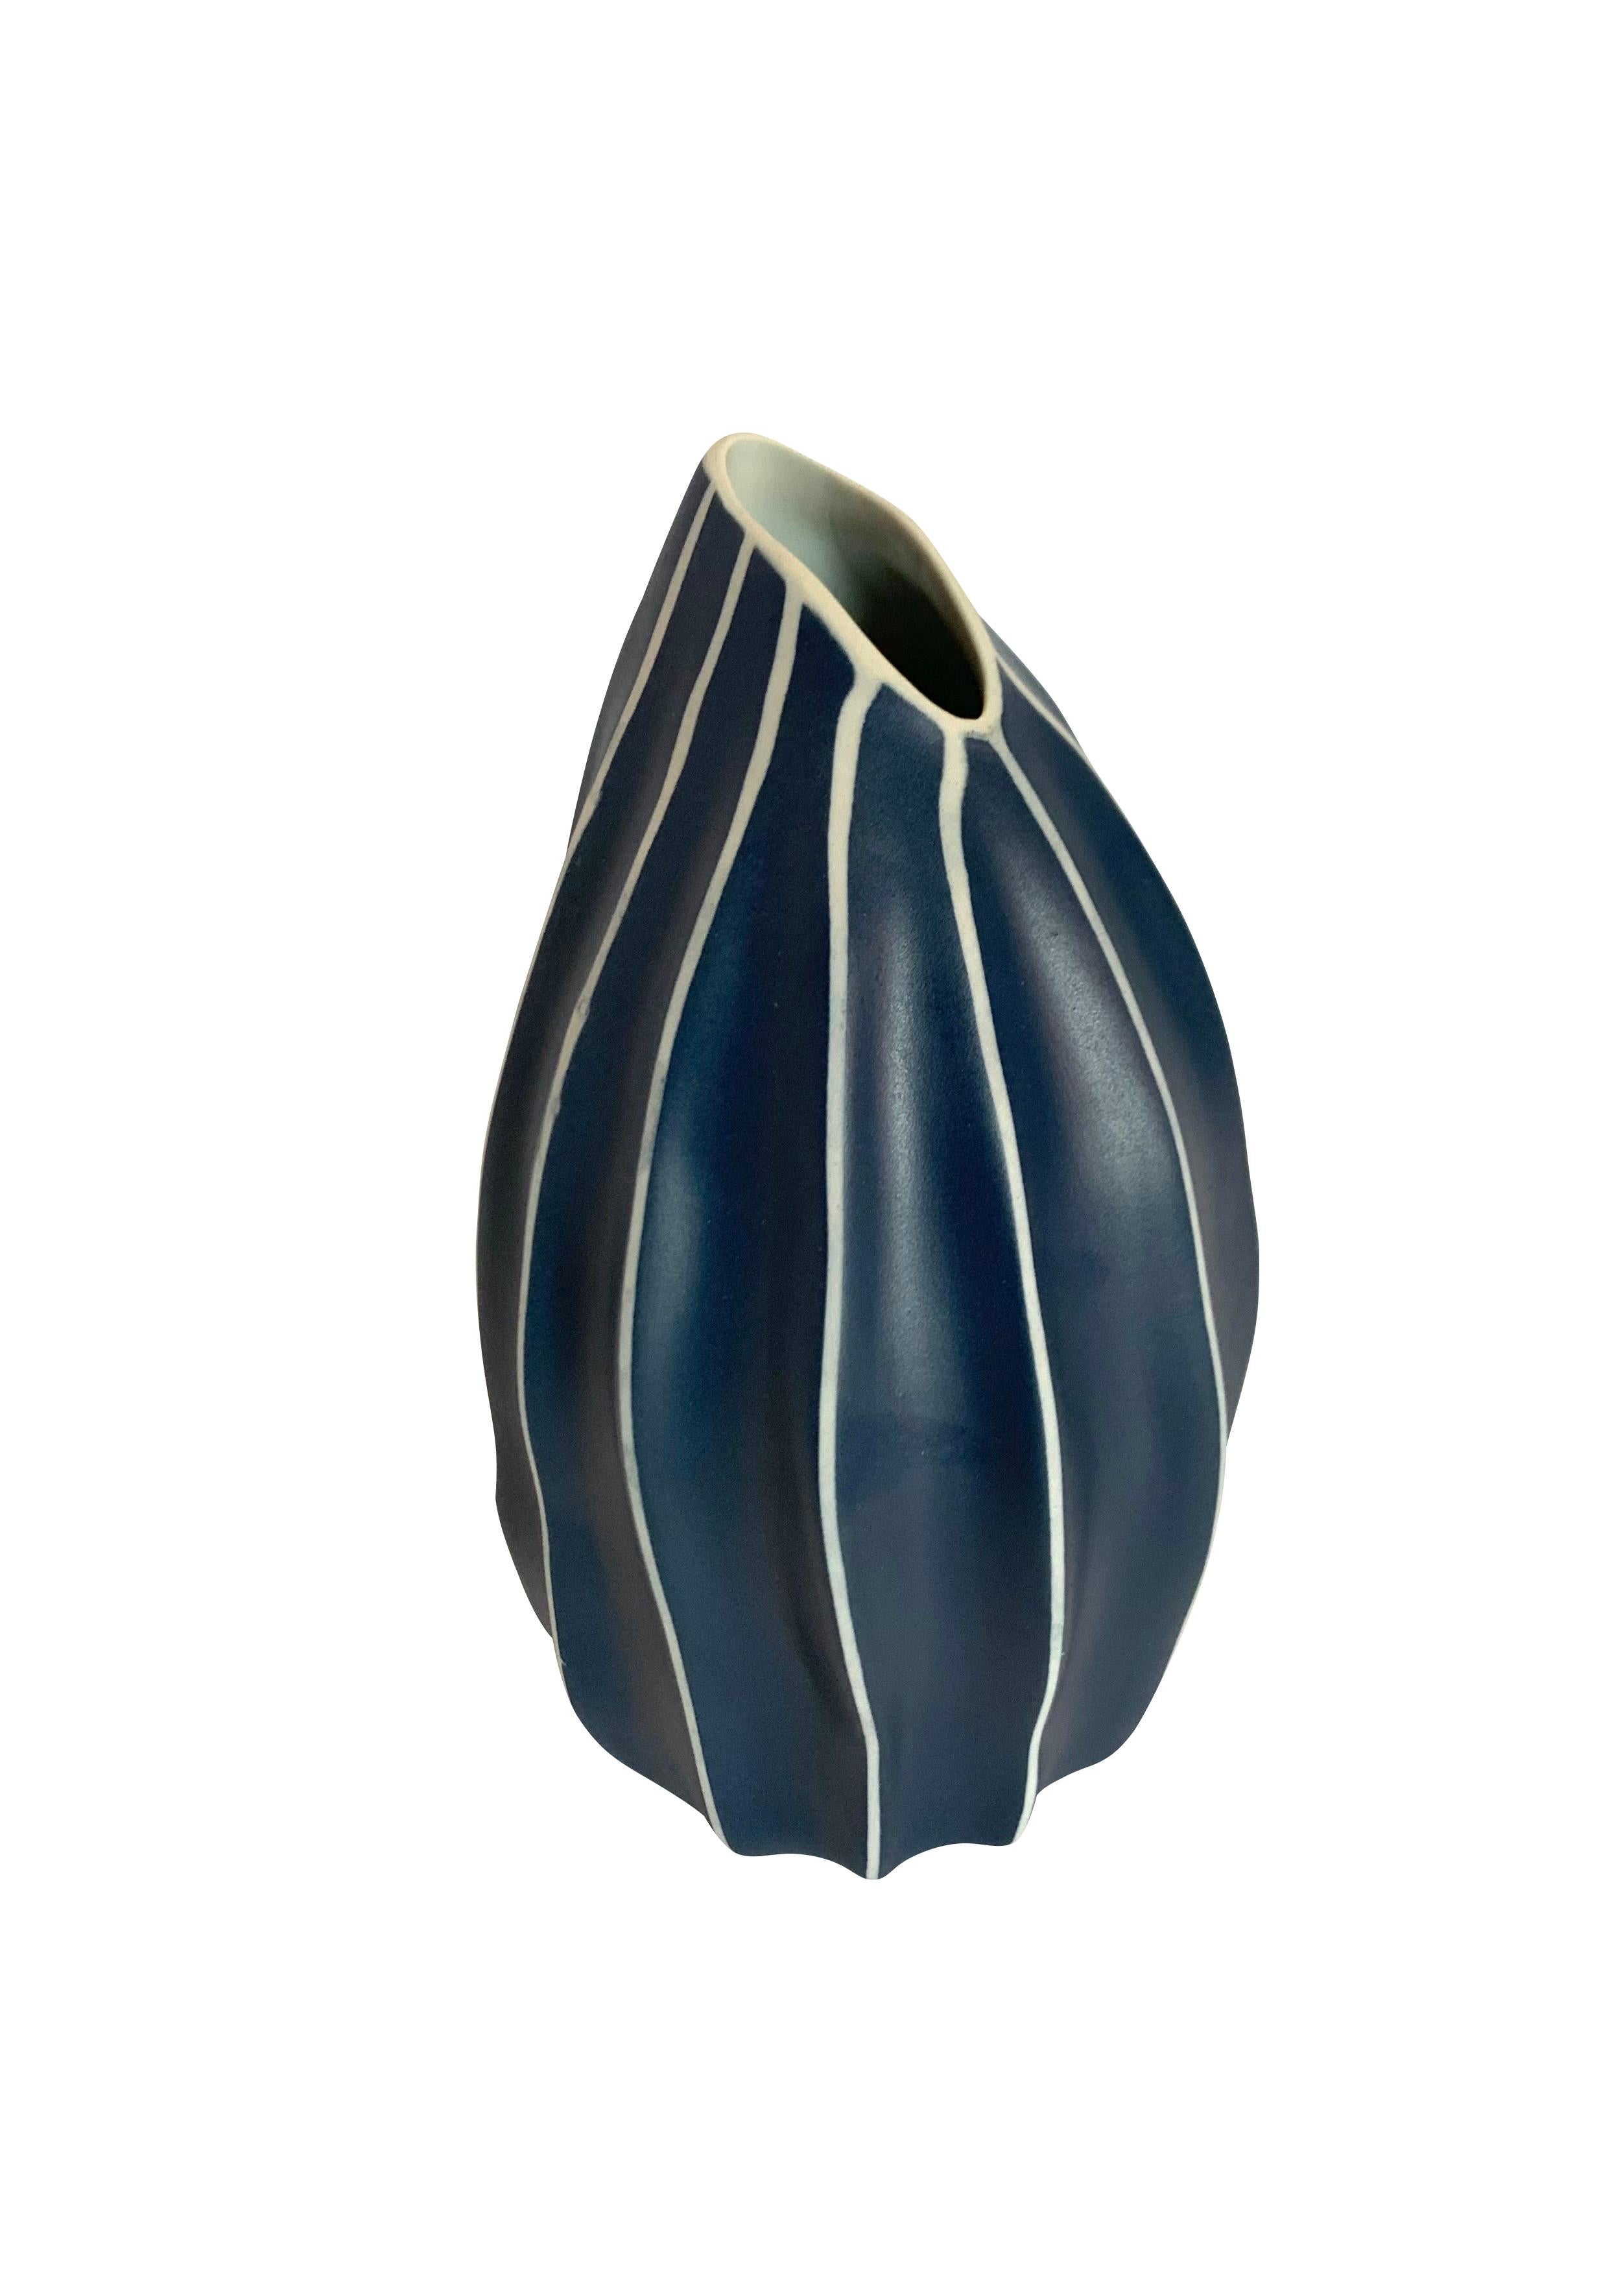 Contemporary Thailand dark blue and white vertical stripe vase.
Slanted oval opening.
Can hold water.
Part of a collection of unusually shaped blue and white vases.
See image #5.